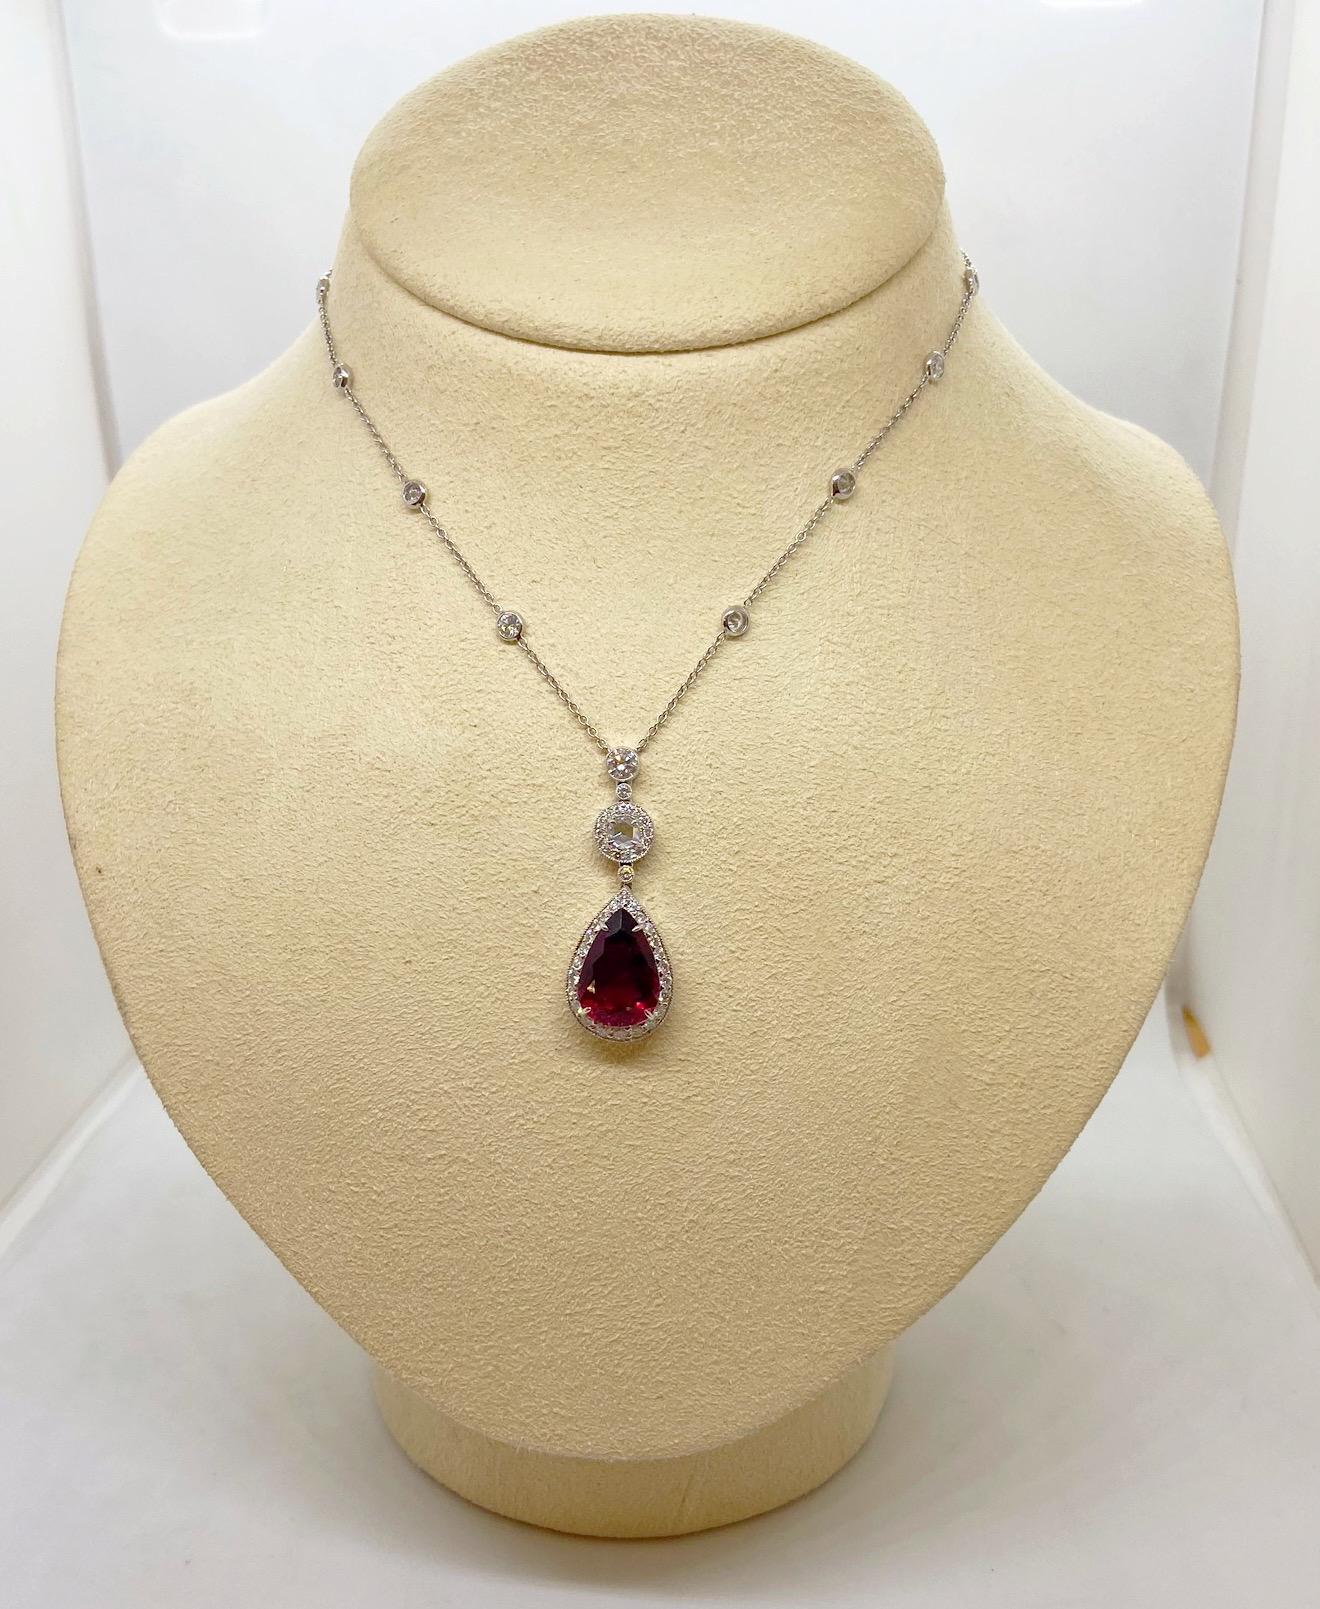 This 18 karat white gold pendant is designed with a pear shaped Rubelite drop. The center stone is joined with a rose cut Diamond, both are set in Diamond bezels. The drop pendant hangs from a white gold chain set with 10 bezel set round brilliant